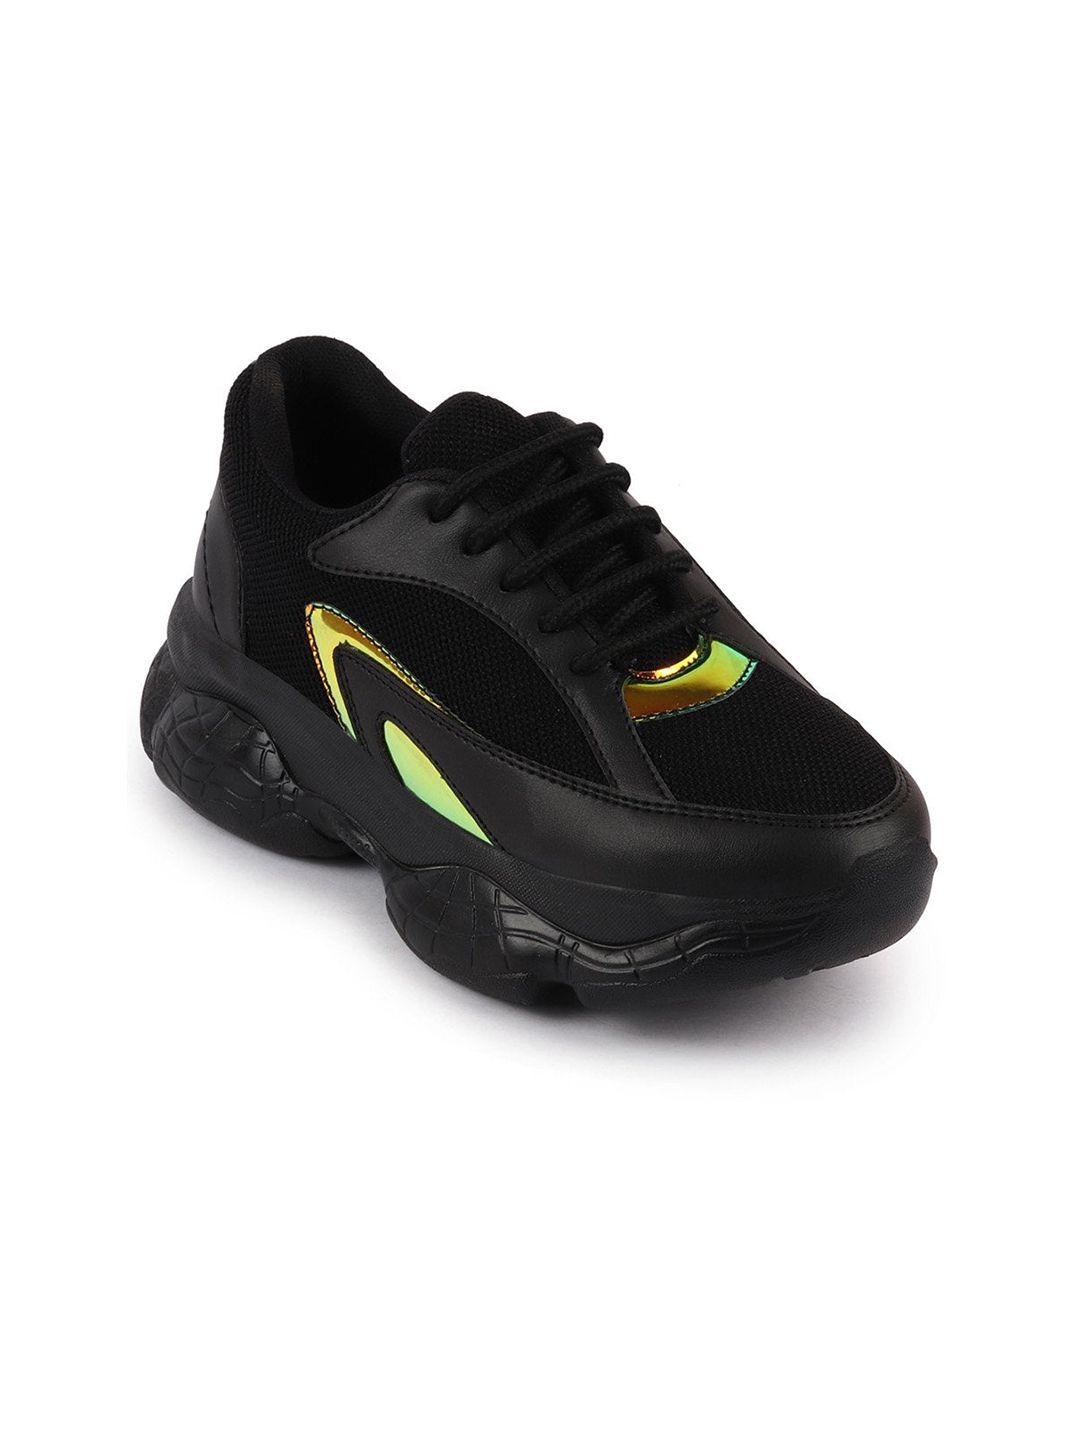 FAUSTO Women Black Running Non-Marking Shoes Price in India